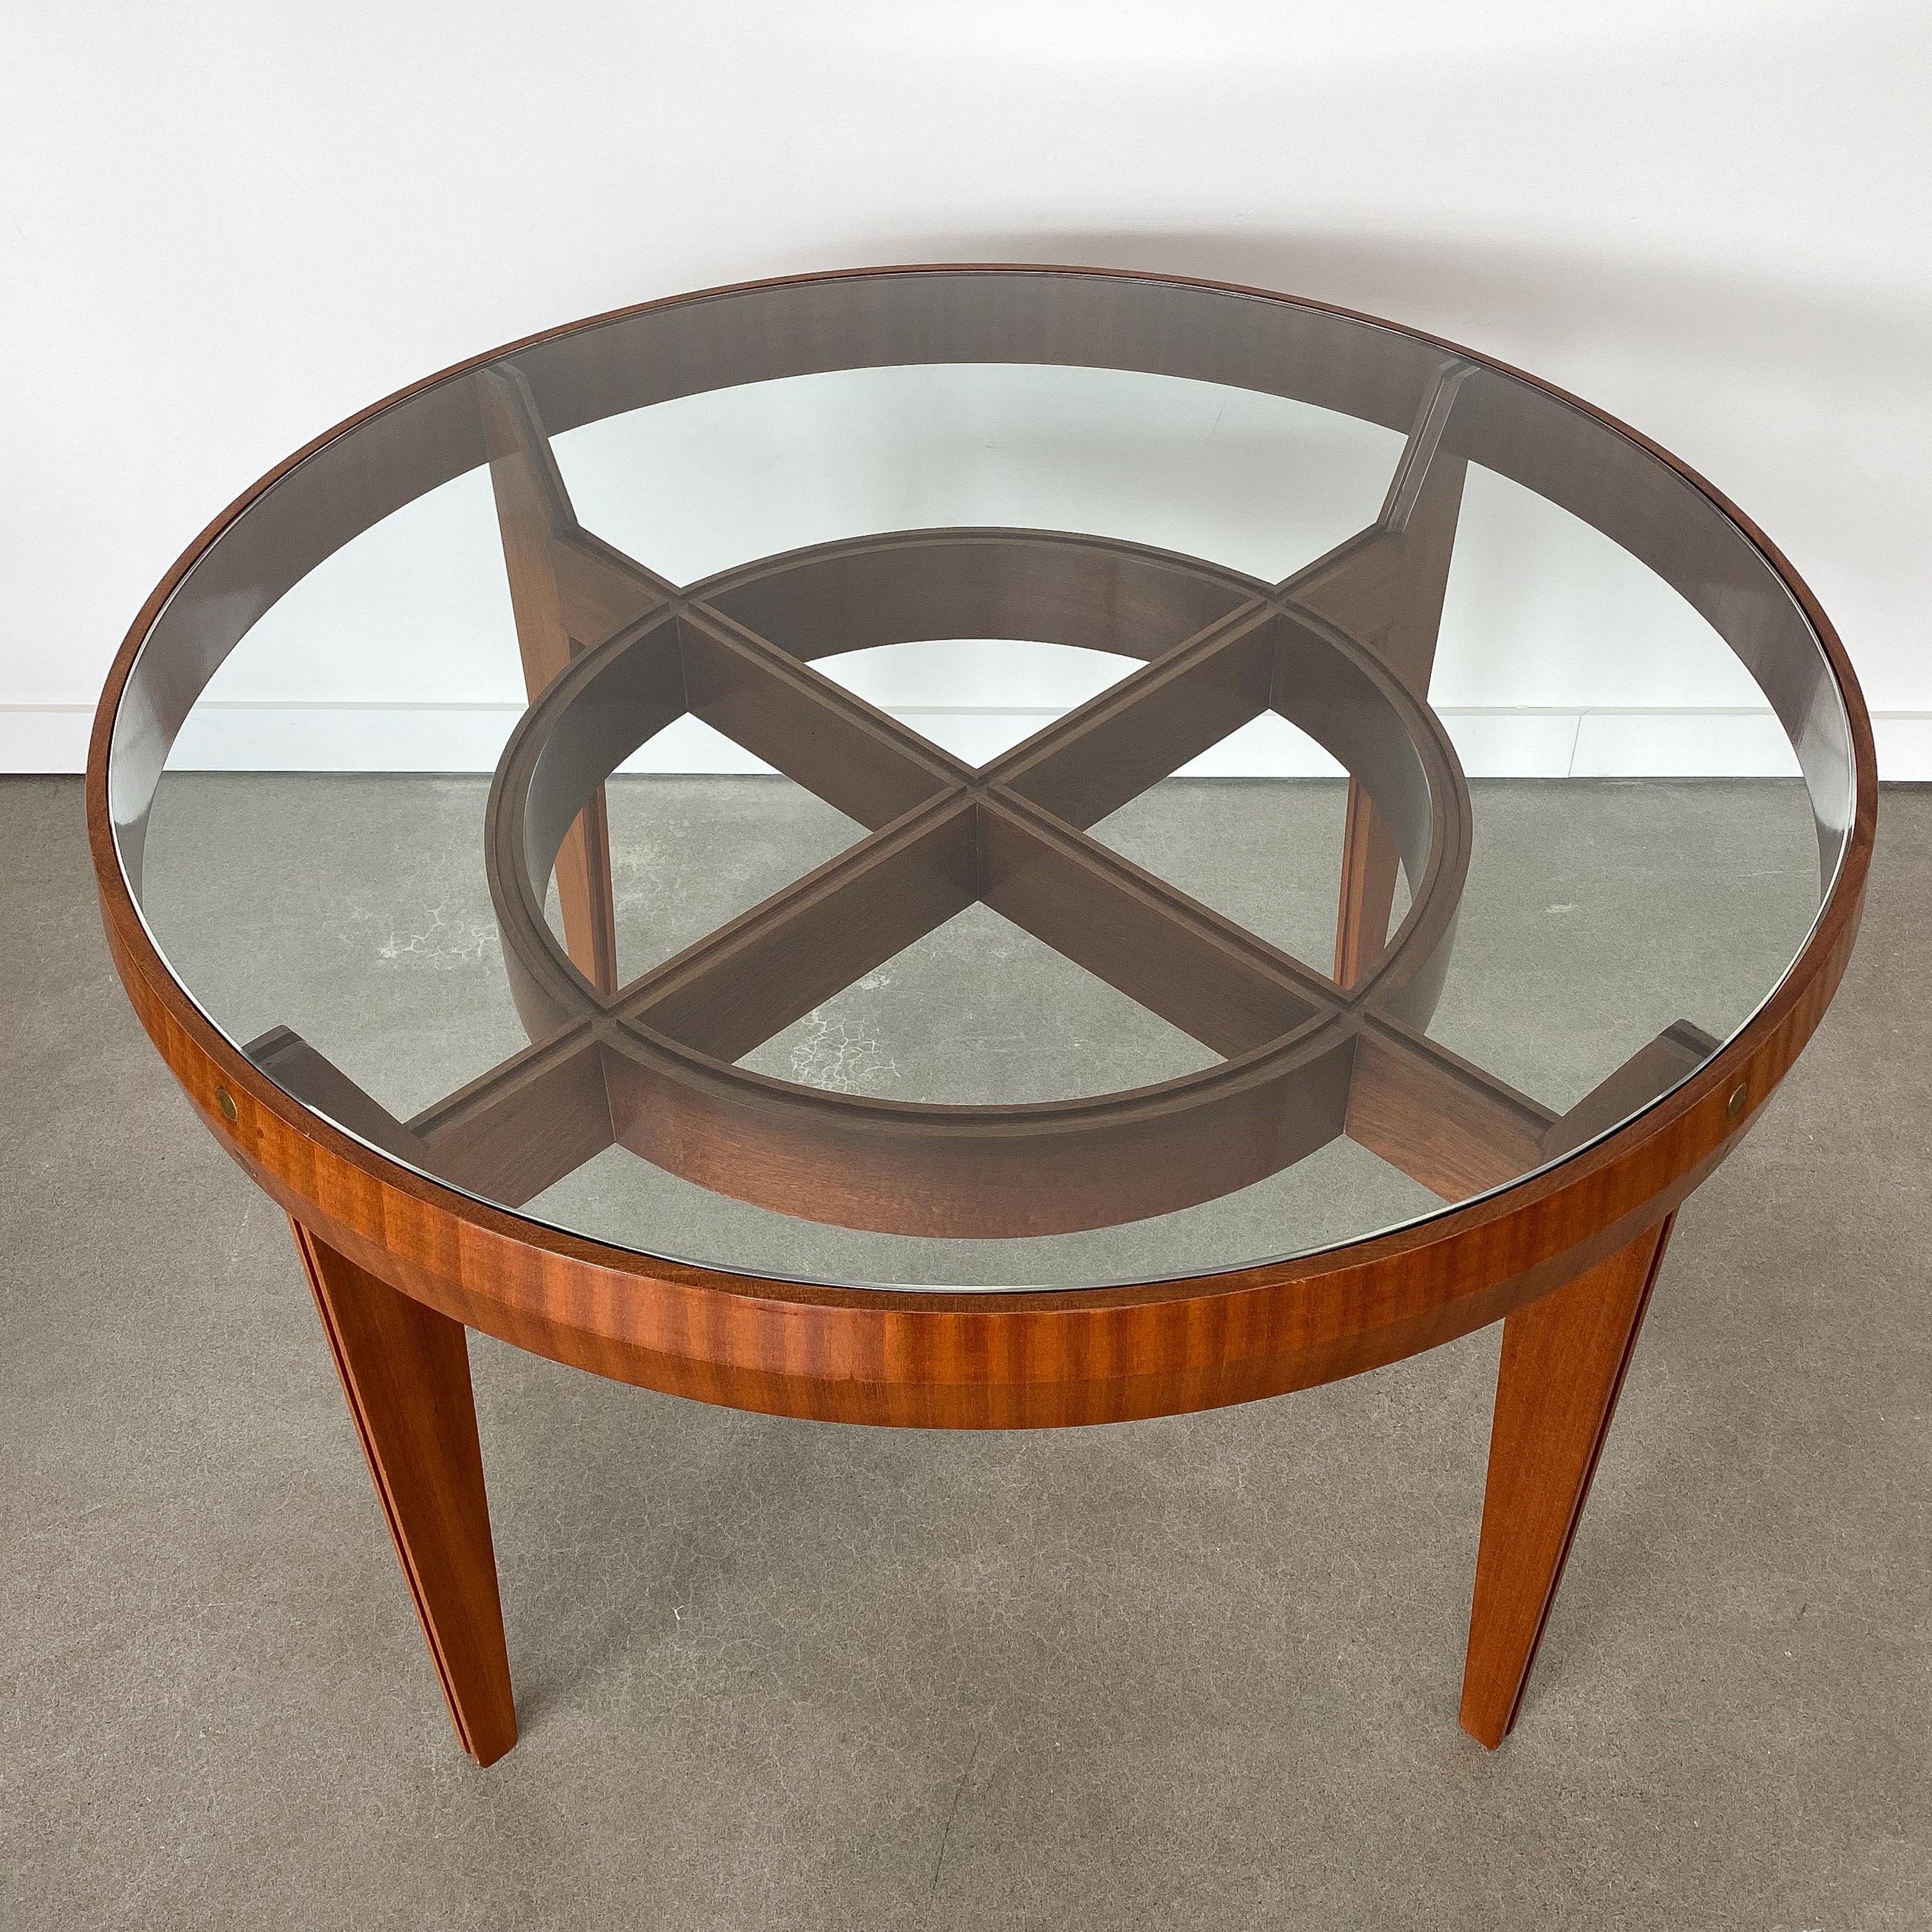 Midcentury Italian walnut center table / dining table in the style of Ico Parisi, circa 1950s. Italian walnut construction with brass circular details at the top of each leg. Inset glass top. 28